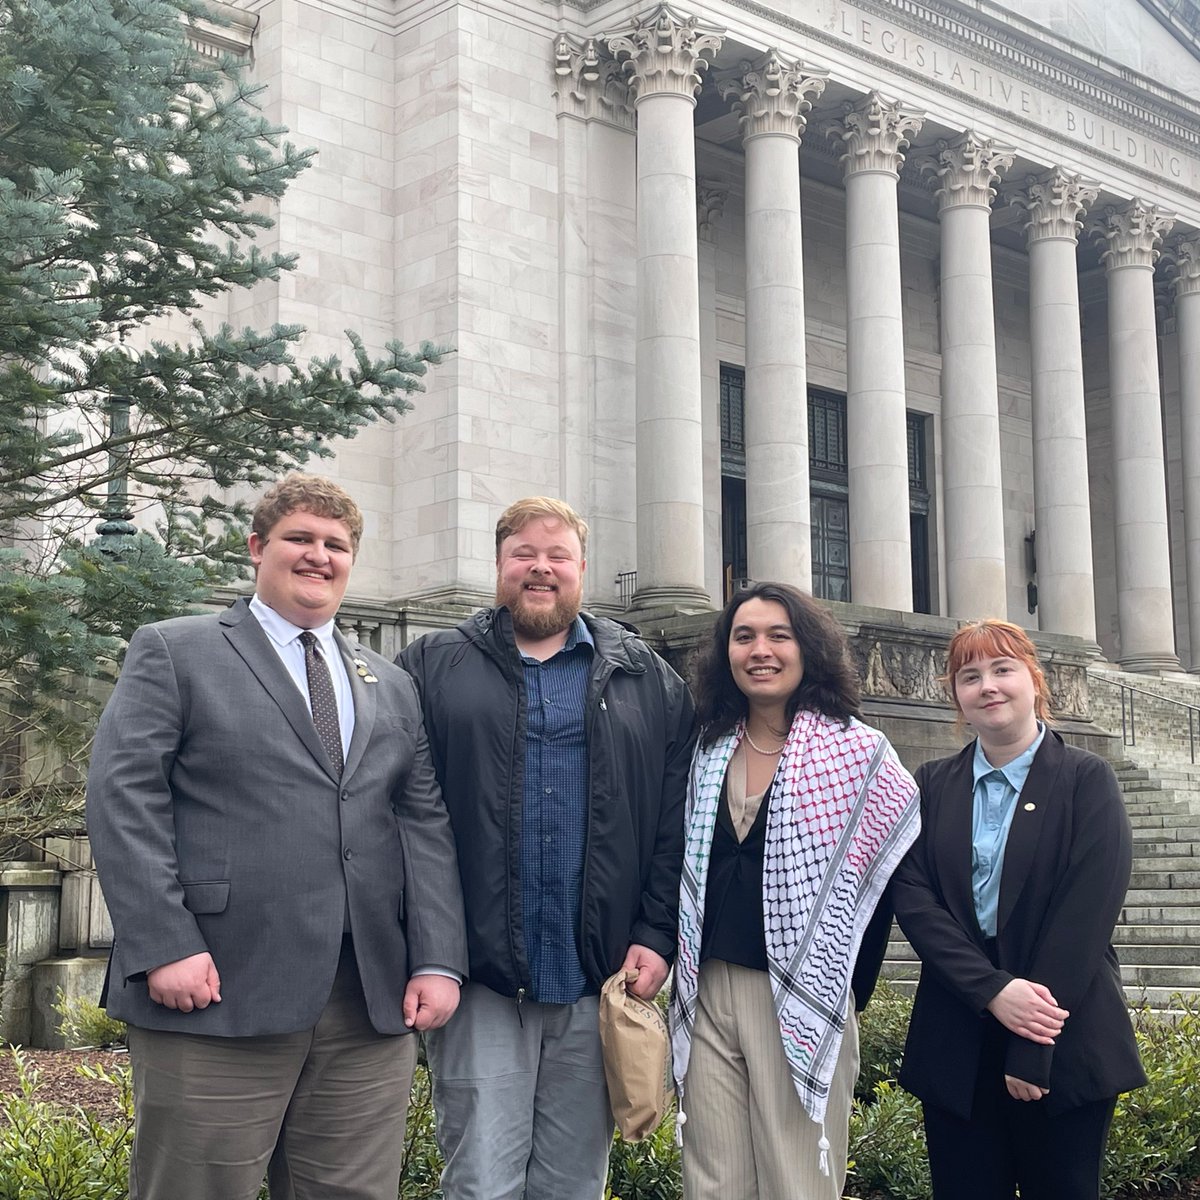 WAWU members traveled to Olympia this weekend to lobby for student collective bargaining rights. We asked legislators for their commitment in supporting a bill similar to SB5895 next year and our ongoing voluntary recognition campaign. Our rights can’t be based on our titles.